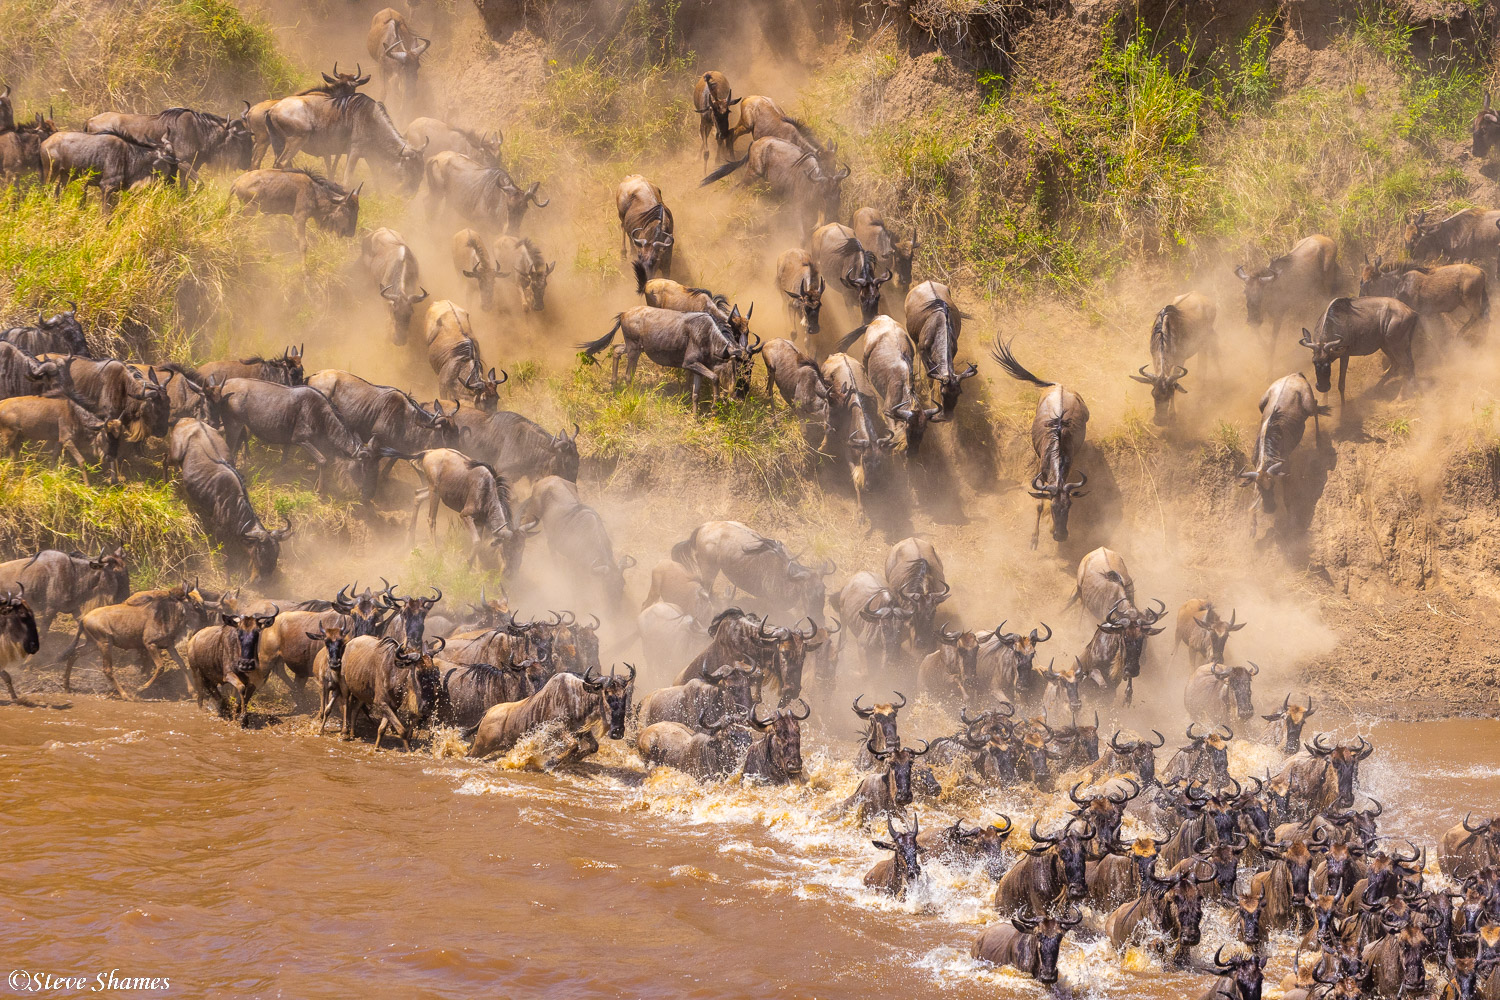 As part of the great migration, rivers must be crossed. They have no choice.